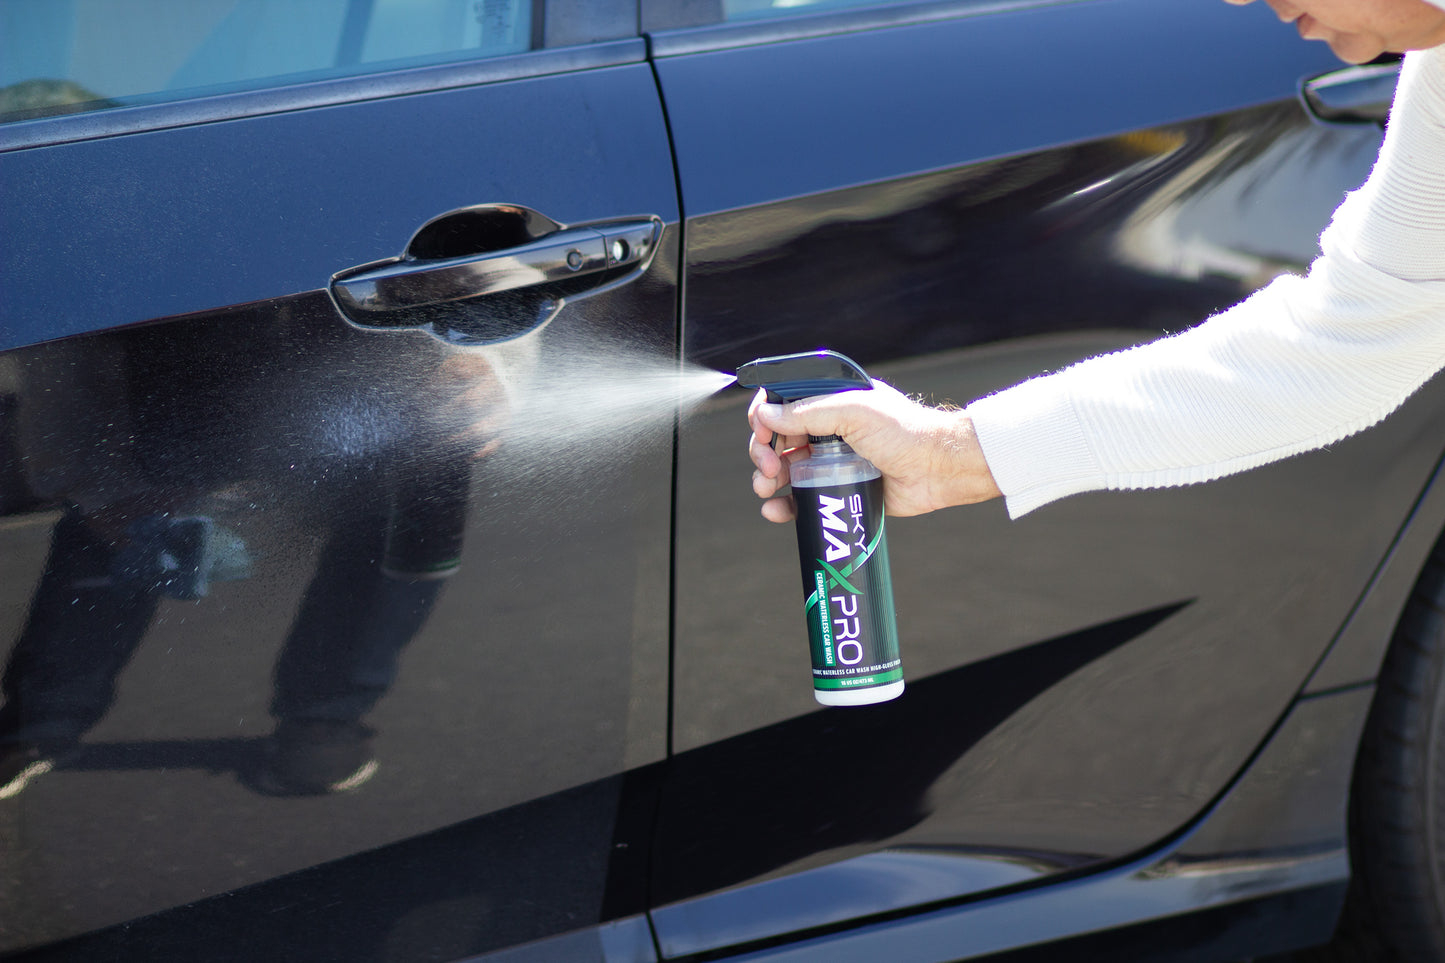 PRO Ceramic Waterless Car Wash Premium Aviation-Garde Cleaning with the latest Nanotechnology Without Swirling or Scratching